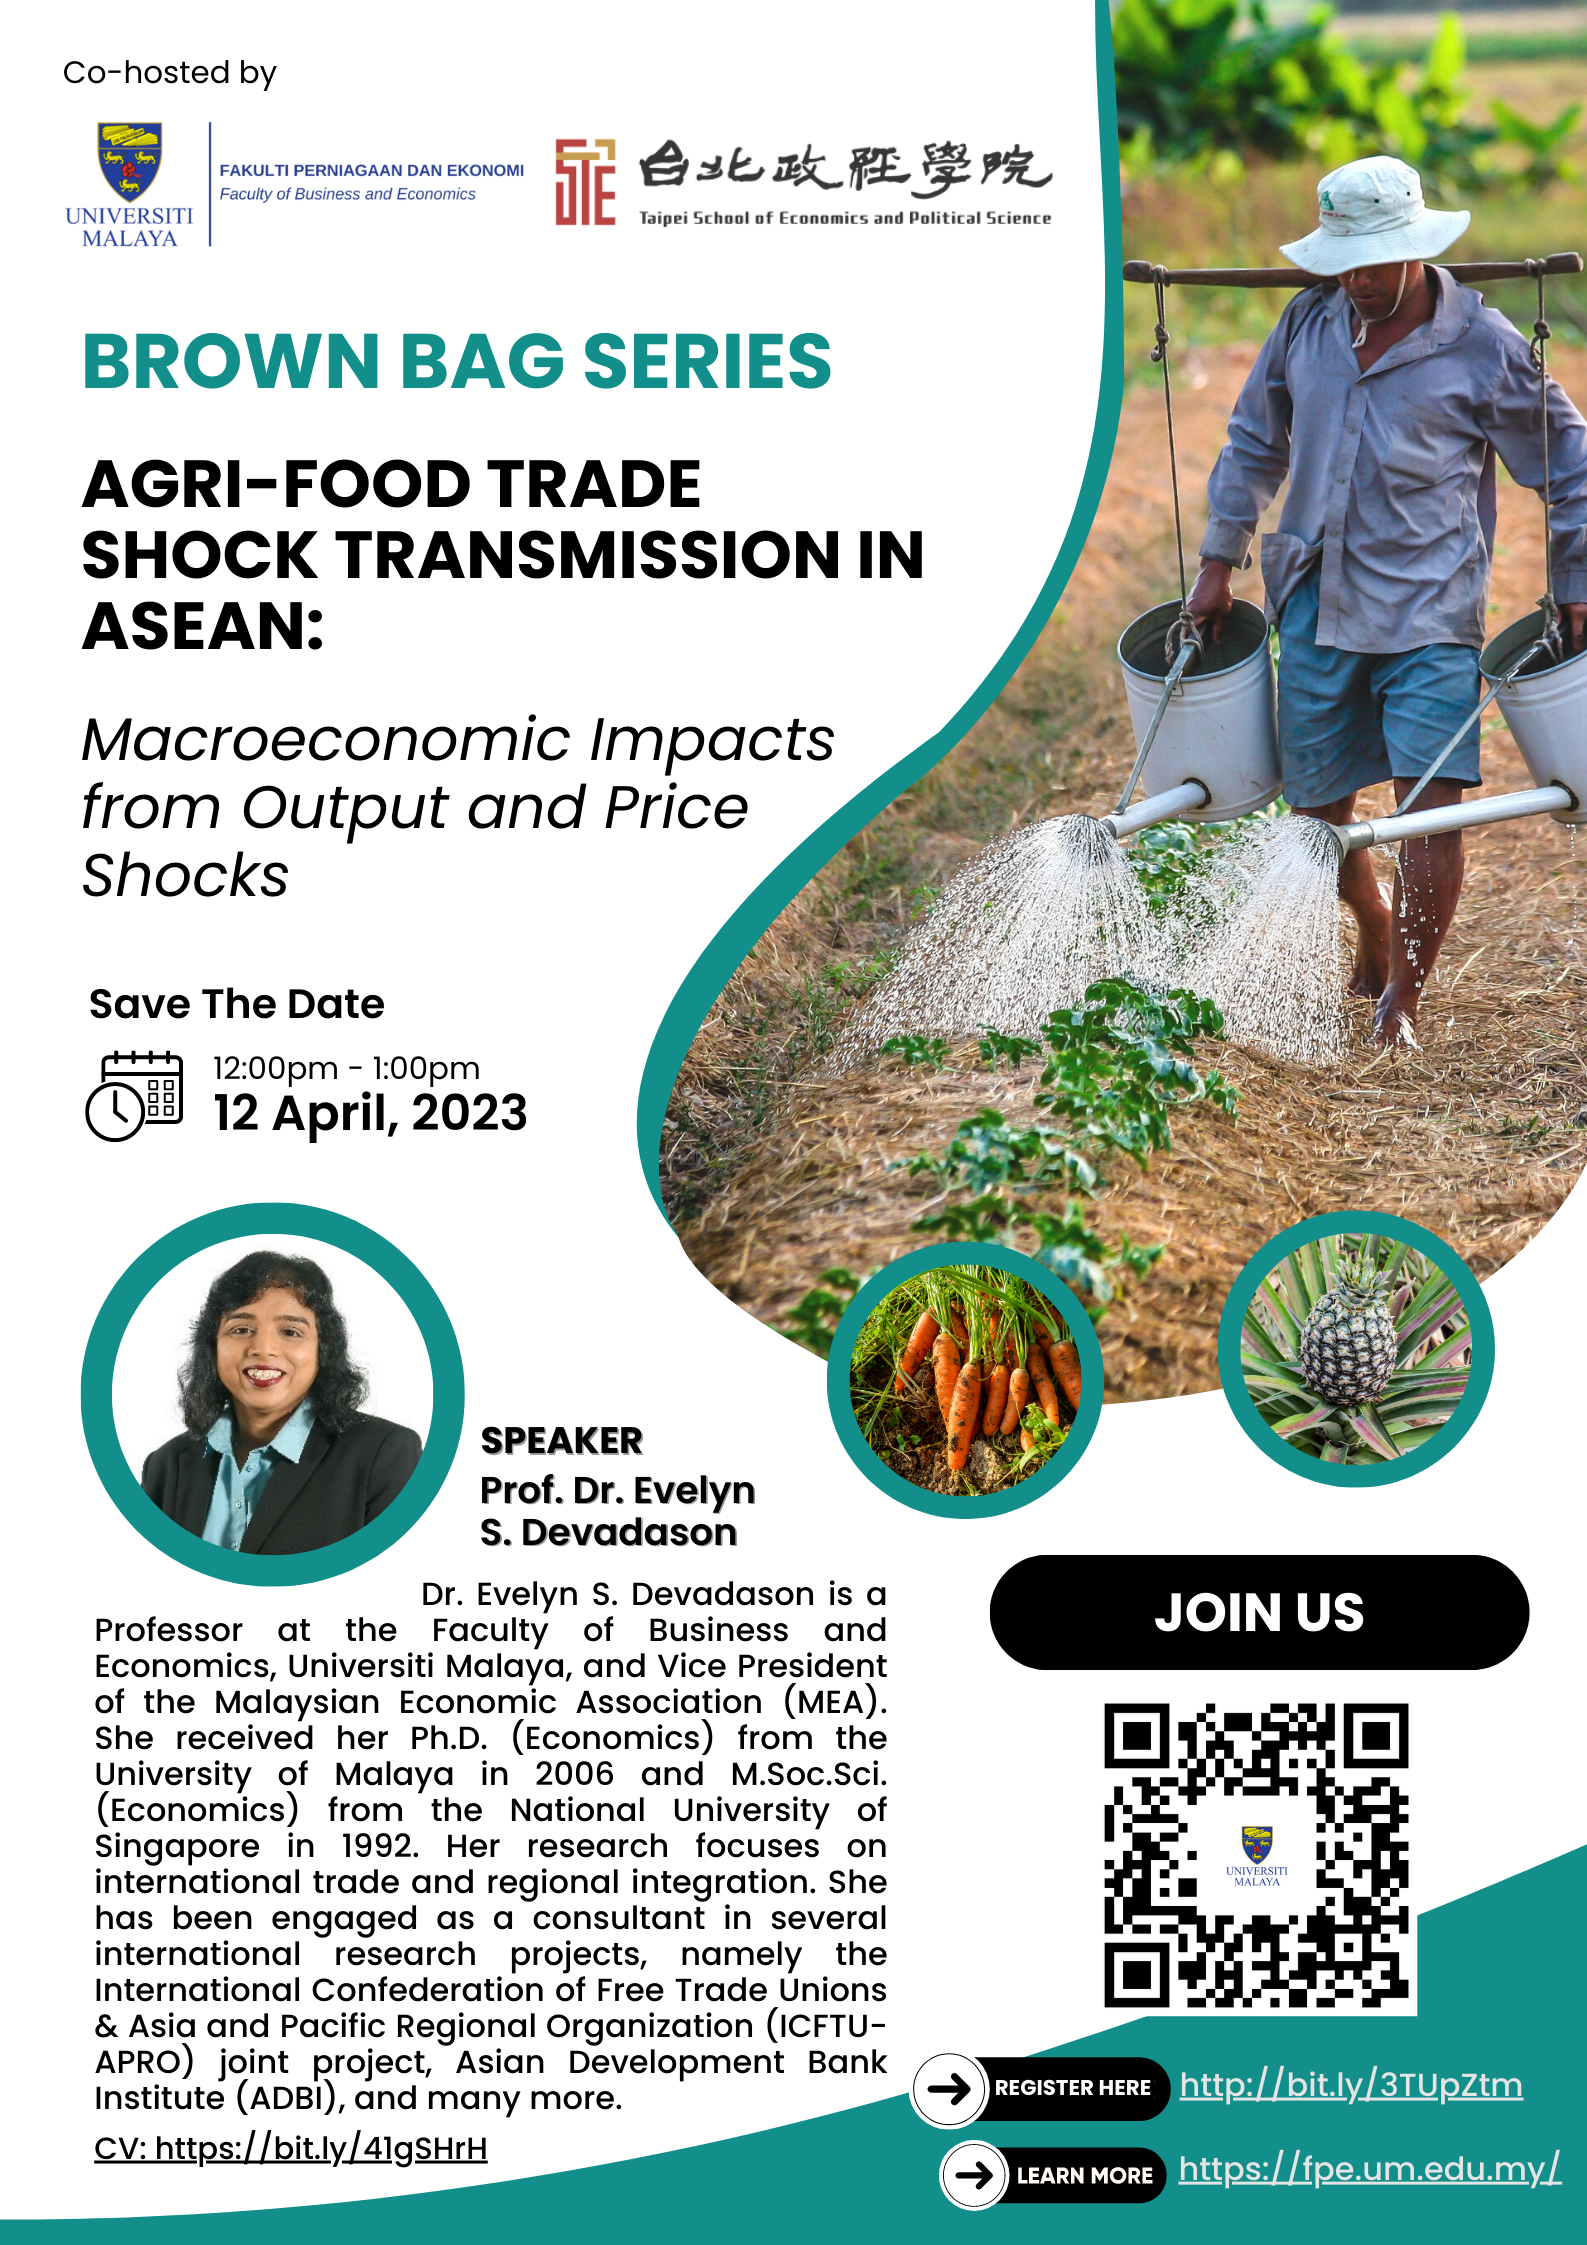 Brown Bag Series: April 12th "Agri-Food Trade Shock Transmission in ASEAN: Macroeconomic Impacts from Output and Price Shocks"